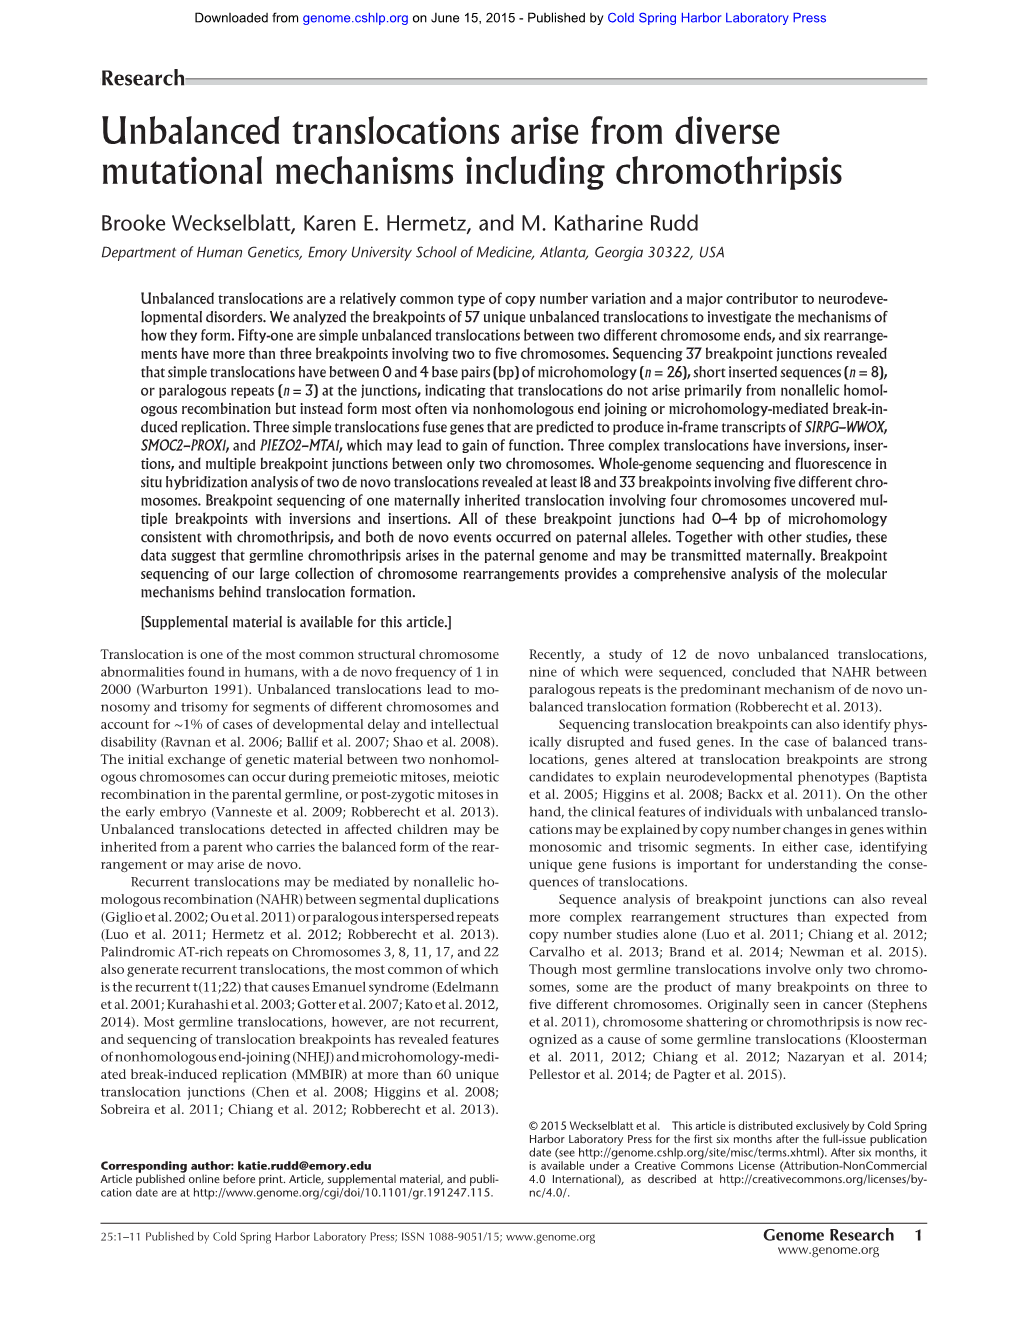 Unbalanced Translocations Arise from Diverse Mutational Mechanisms Including Chromothripsis